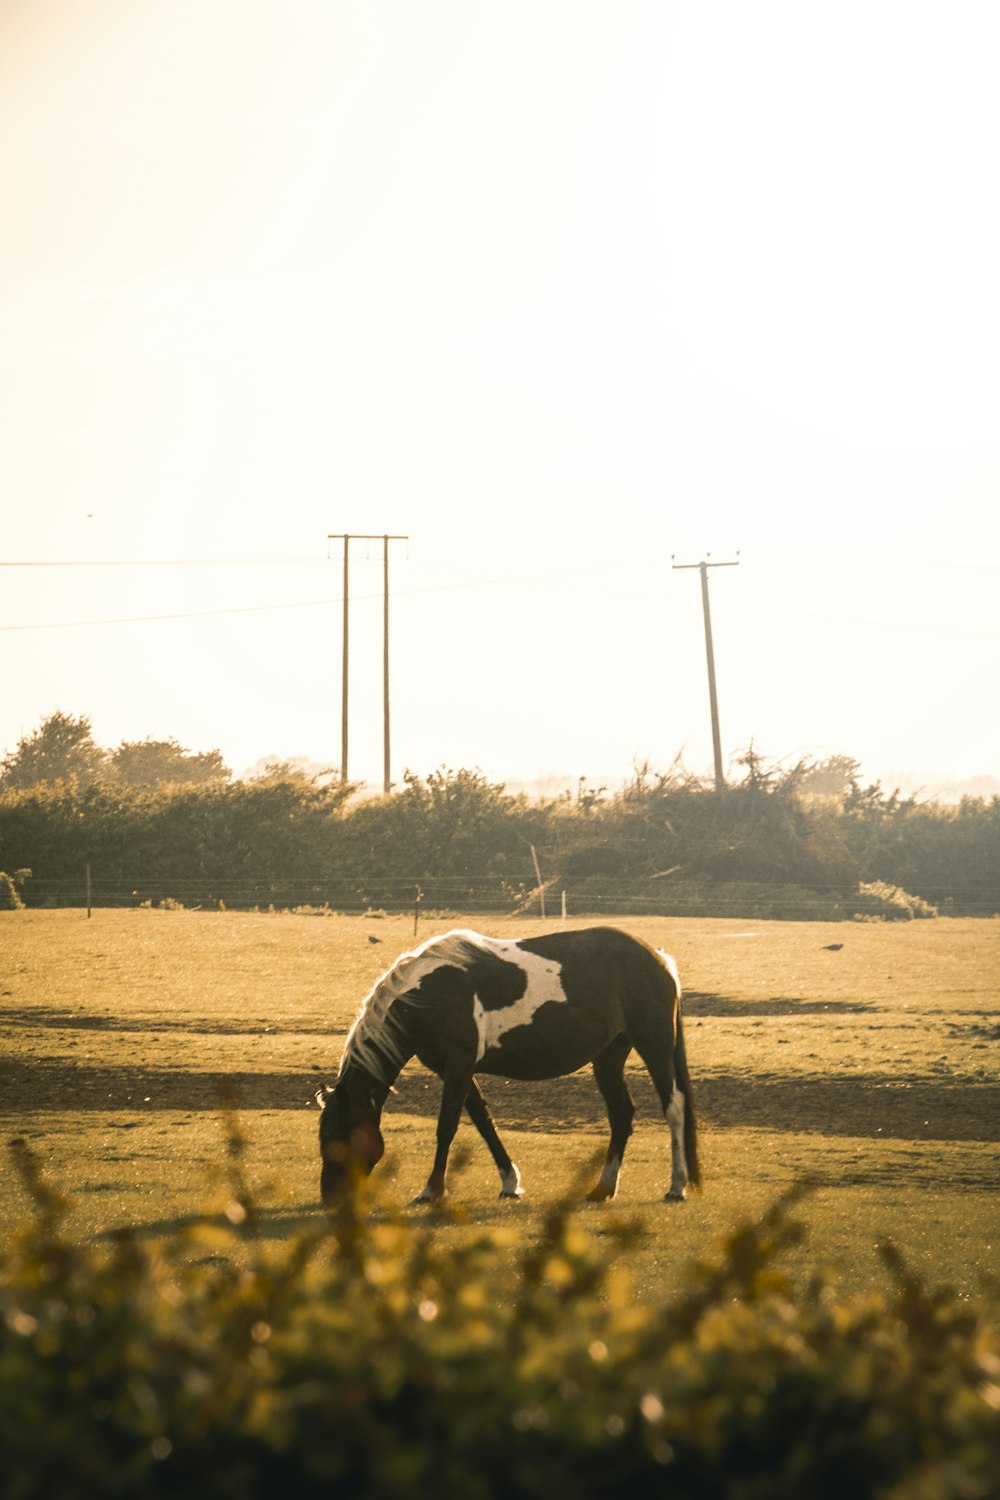 black and white horse running on brown field during daytime